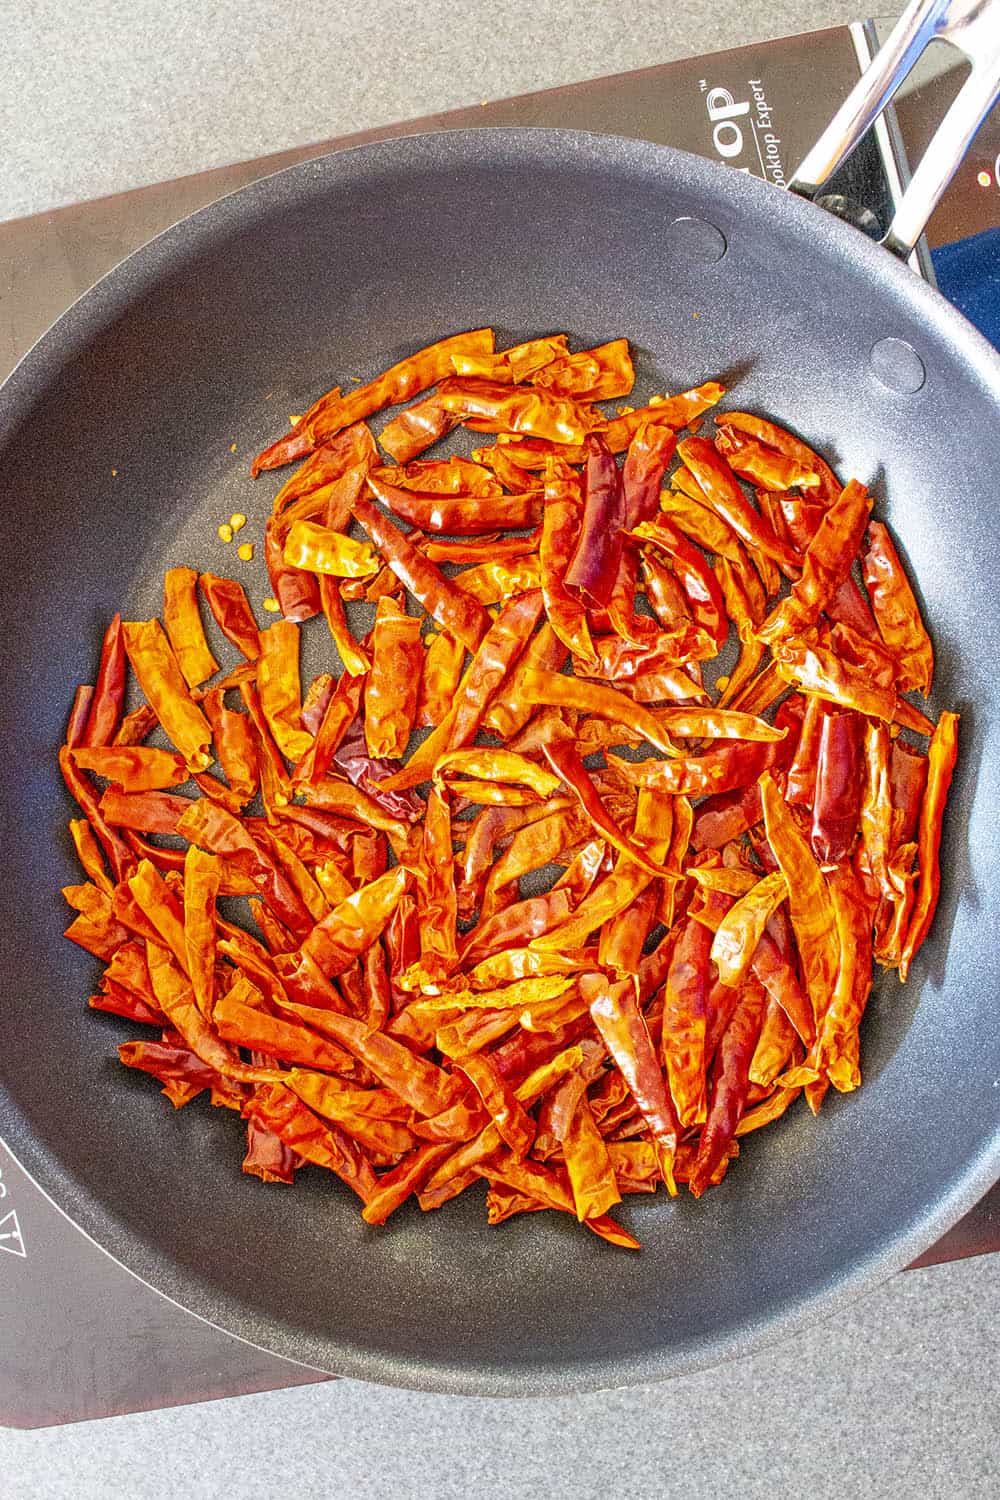 Chile de Arbol peppers being lightly toasted in a dry pan